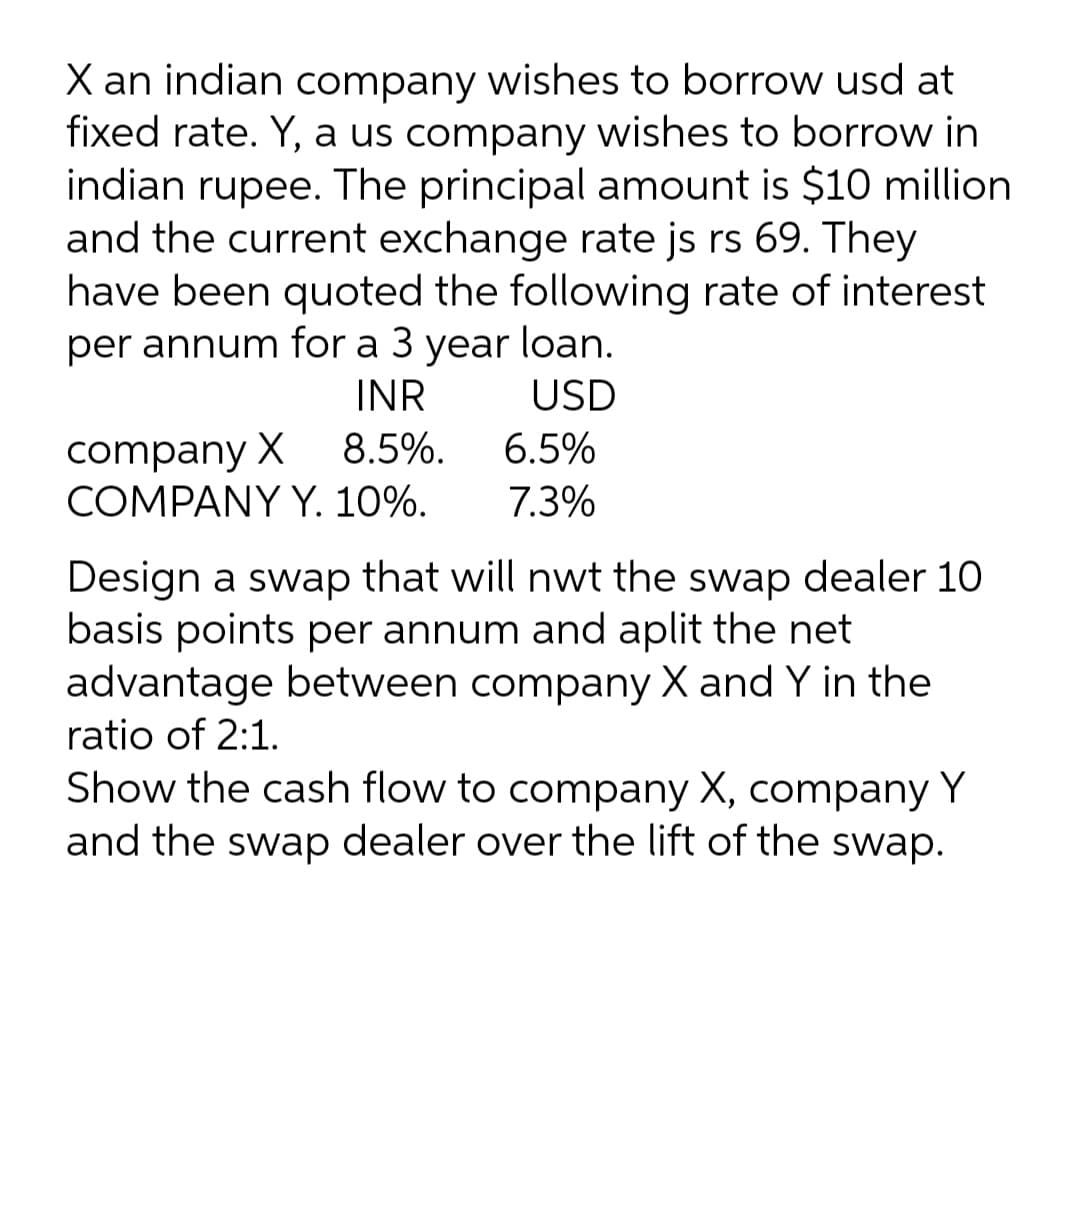 X an indian company wishes to borrow usd at
fixed rate. Y, a us company wishes to borrow in
indian rupee. The principal amount is $10 million
and the current exchange rate js rs 69. They
have been quoted the following rate of interest
loan.
per annum for a 3
year
INR
USD
company X
COMPANY Y. 10%.
8.5%.
6.5%
7.3%
Design a swap that will nwt the swap dealer 10
basis points per annum and aplit the net
advantage between company X and Y in the
ratio of 2:1.
Show the cash flow to company X, company Y
and the swap dealer over the lift of the swap.
